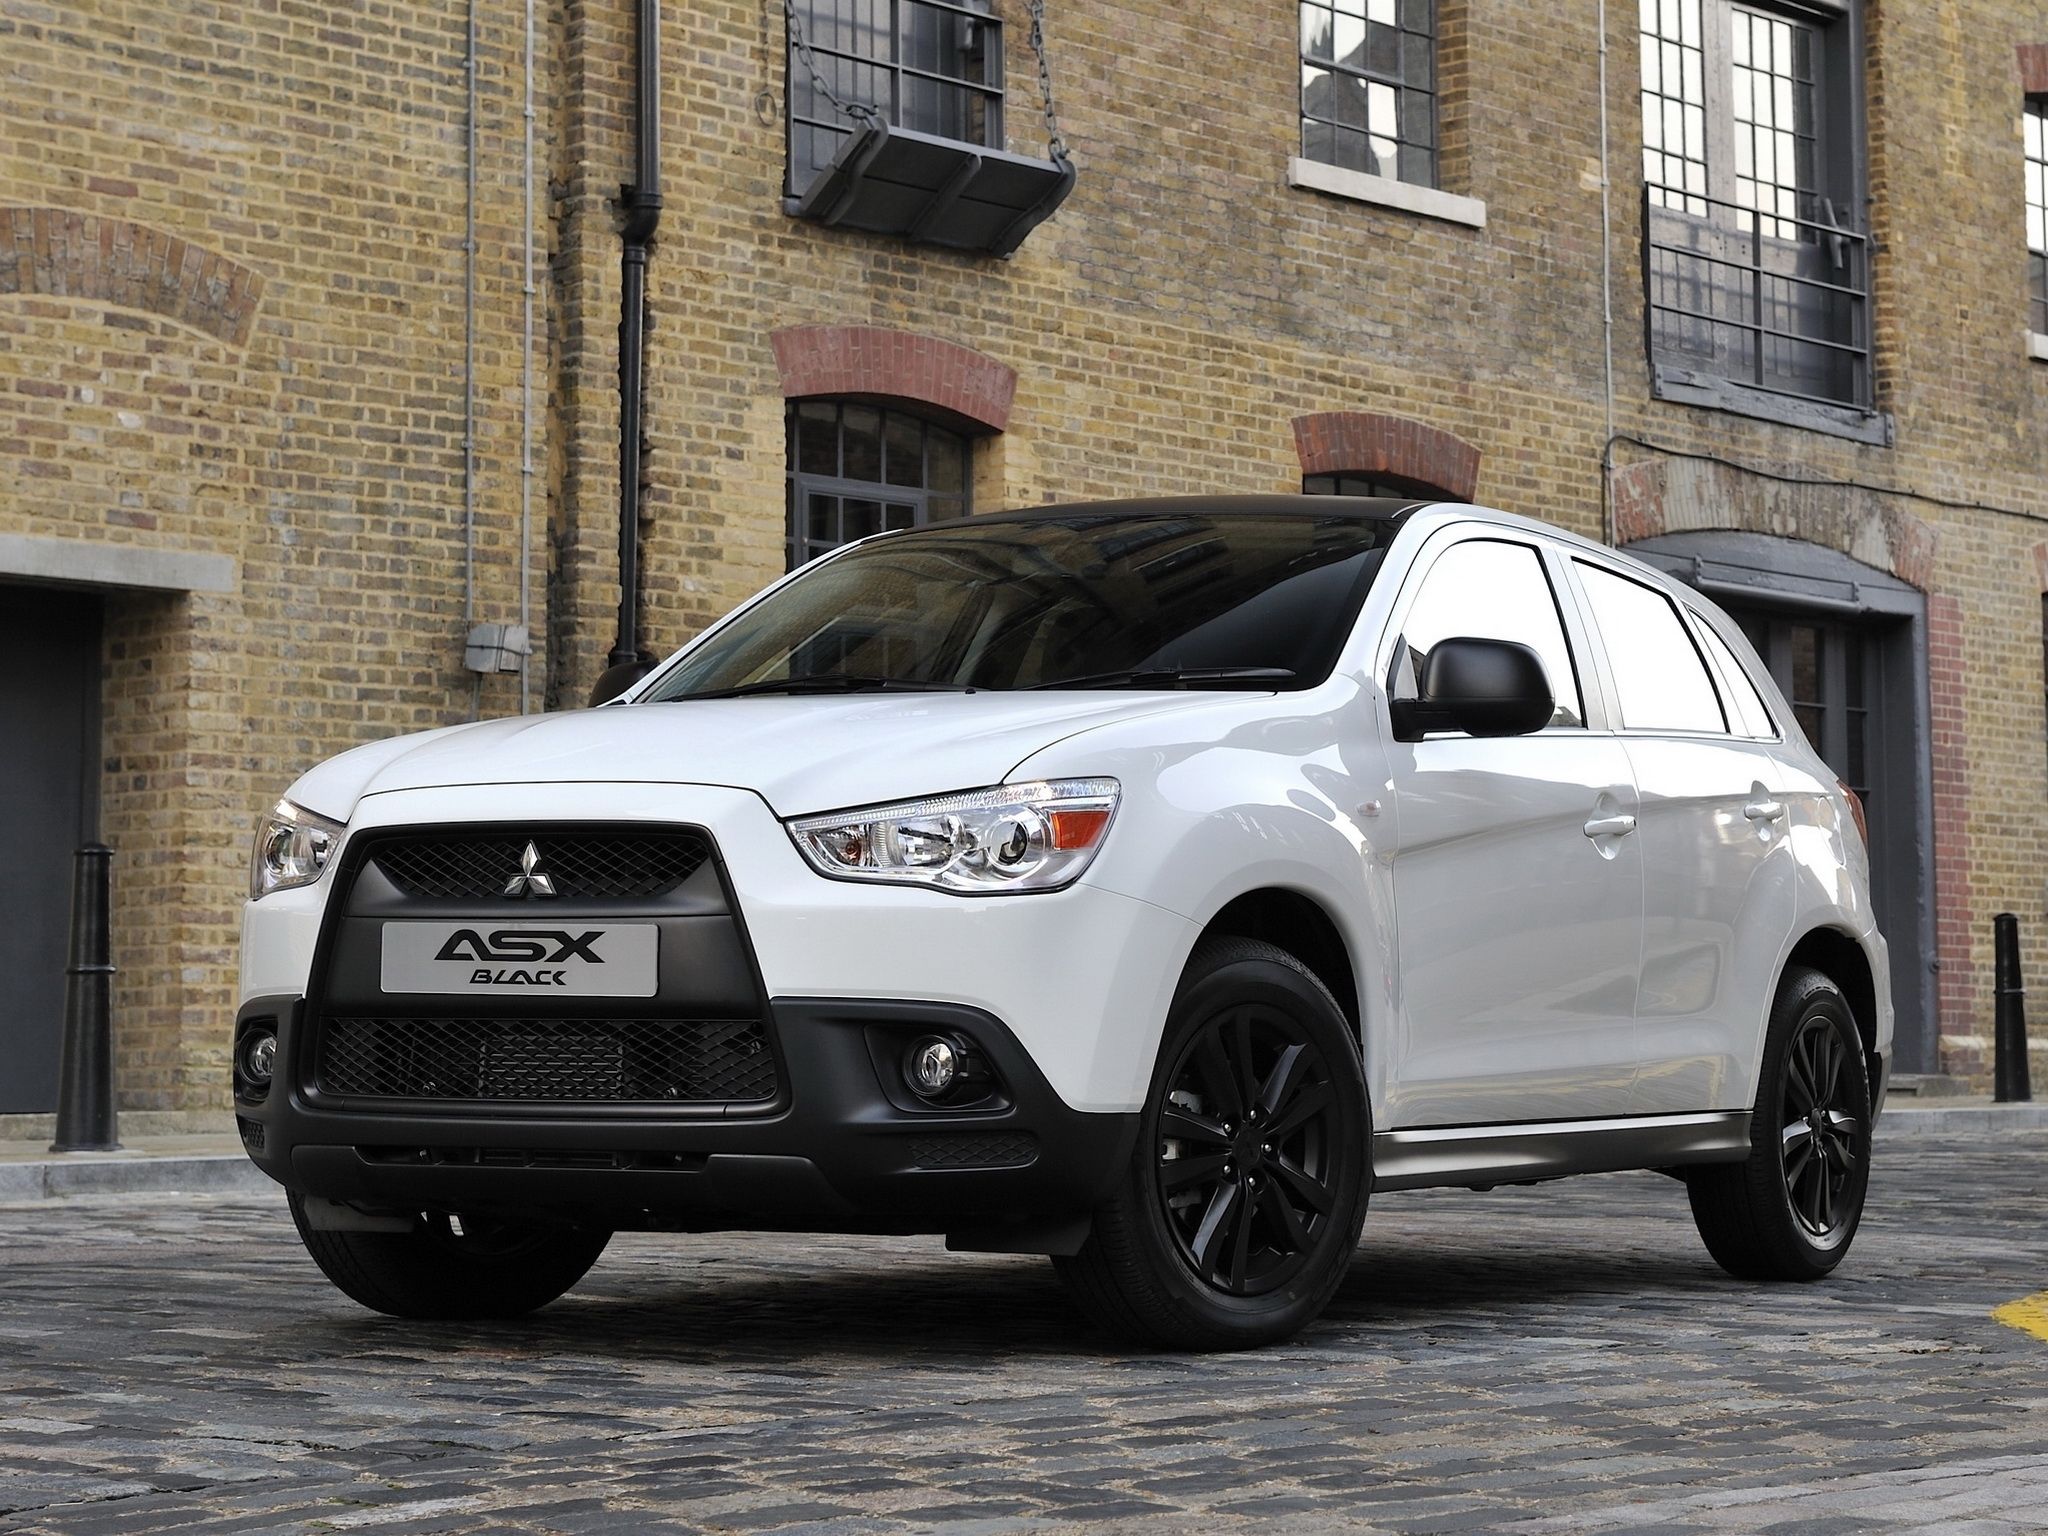 Mitsubishi Asx Black Sold As An Outlander In Usa Indonesia And